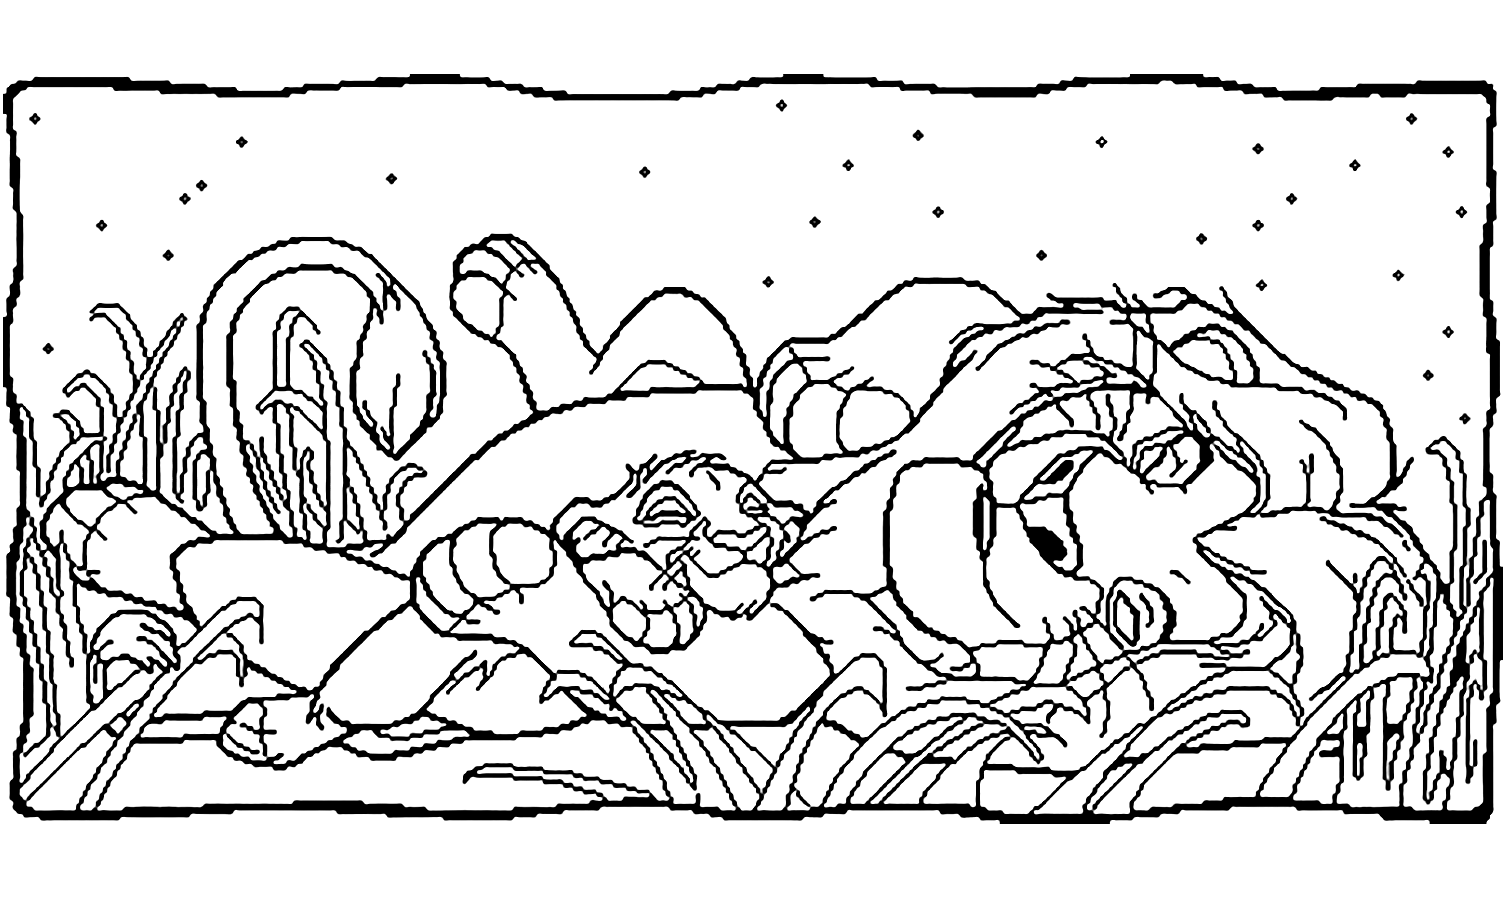 The Lion King coloring page with Simba and Mufasa